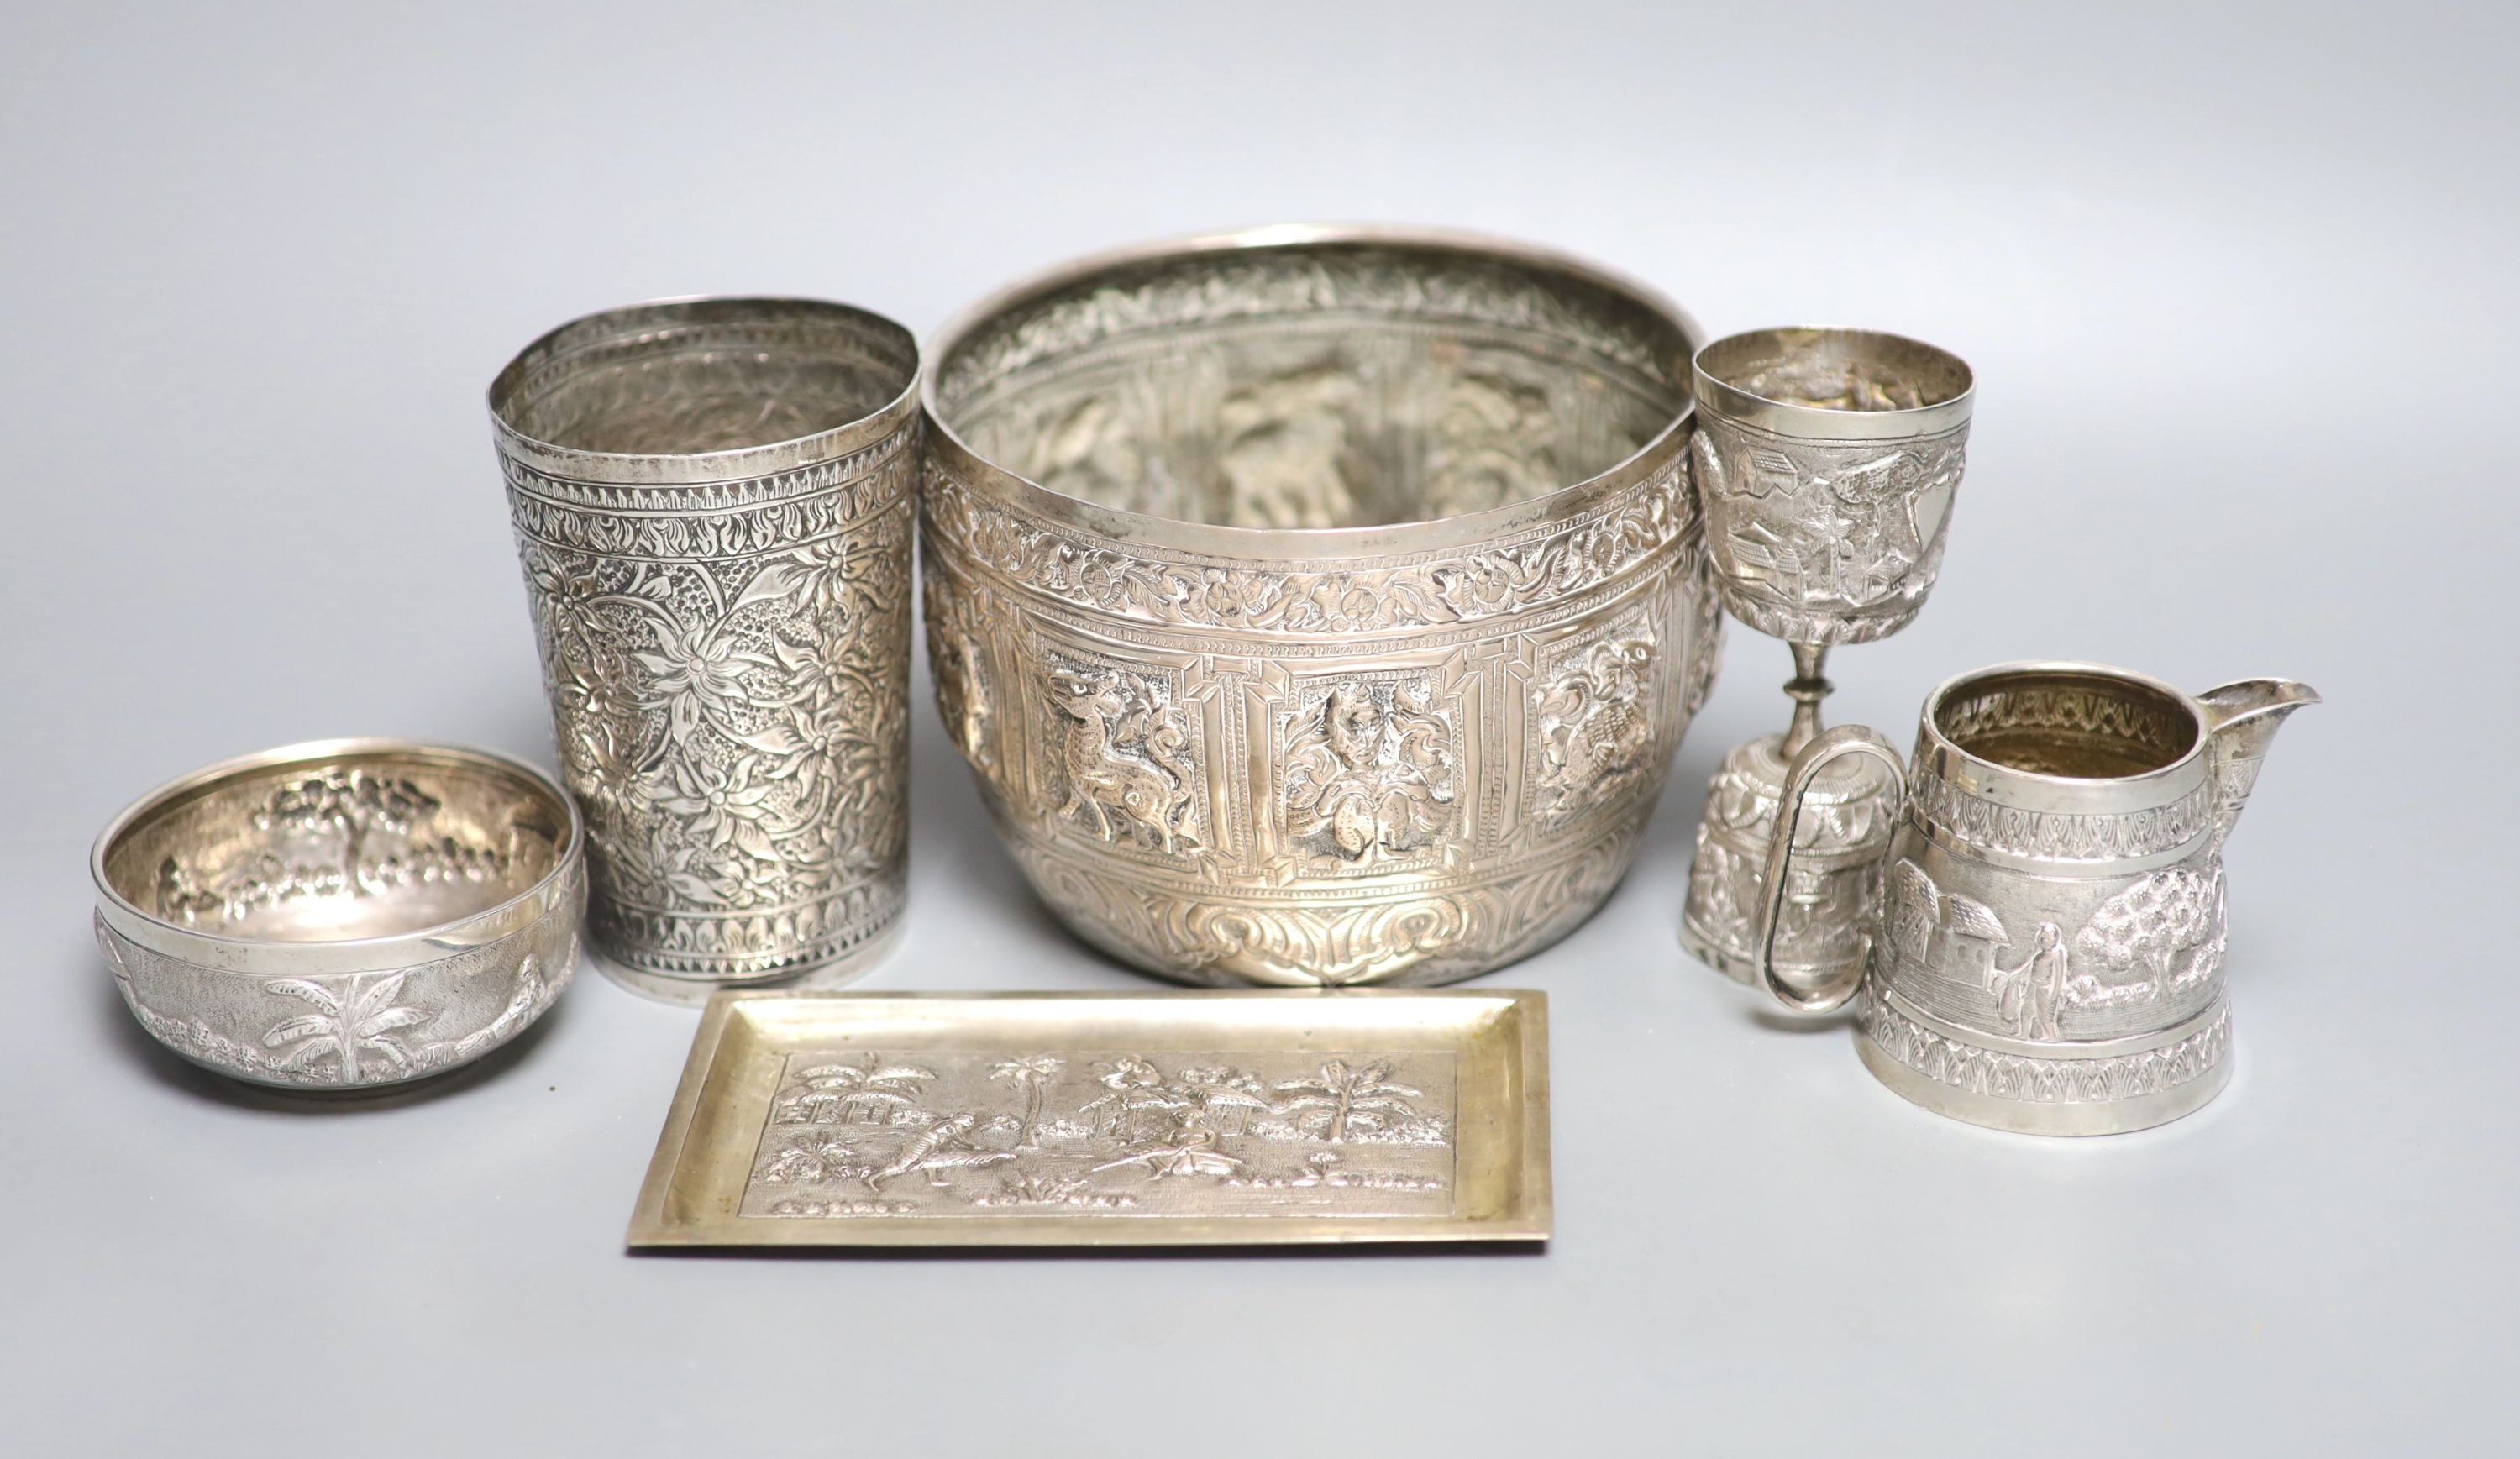 A group of Indian items including a white metal bowl embossed with animals, diameter 14.2cm, cream jug, measure, bowl, dish and beaker.